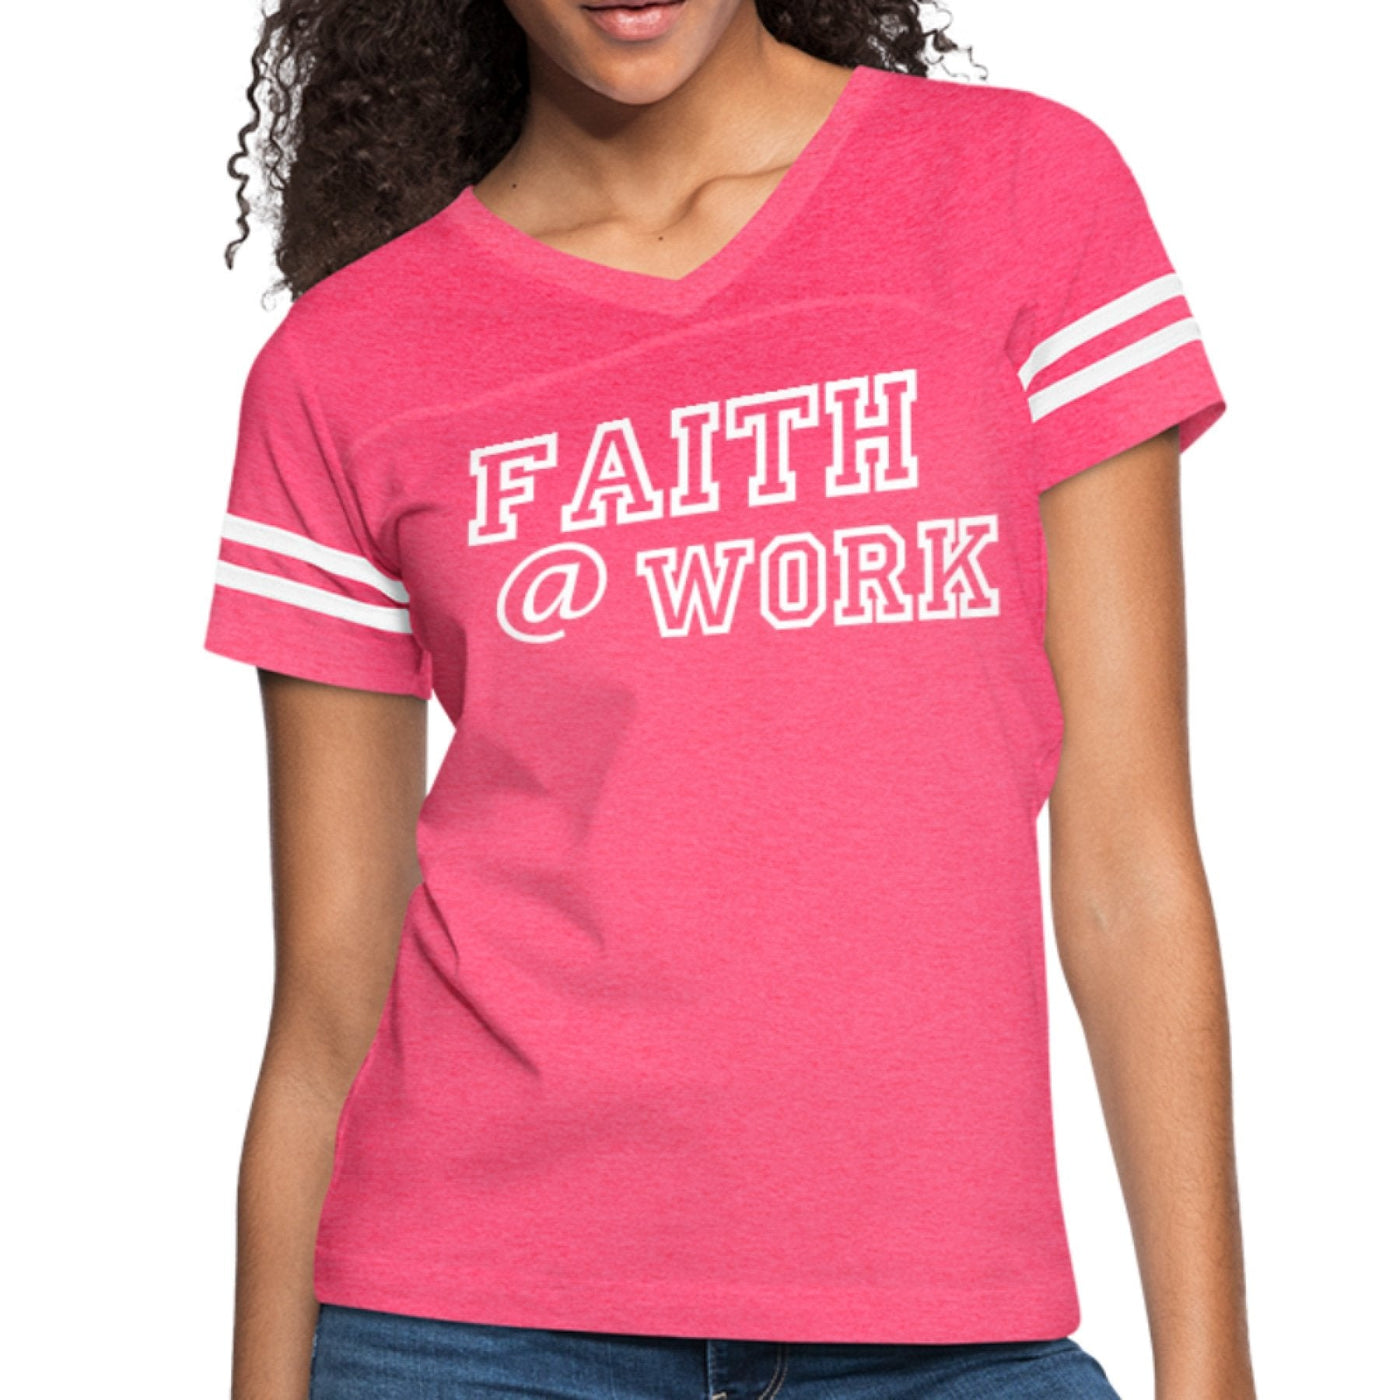 Womens Graphic Vintage Sport T-shirt Faith At Work Illustration - Womens